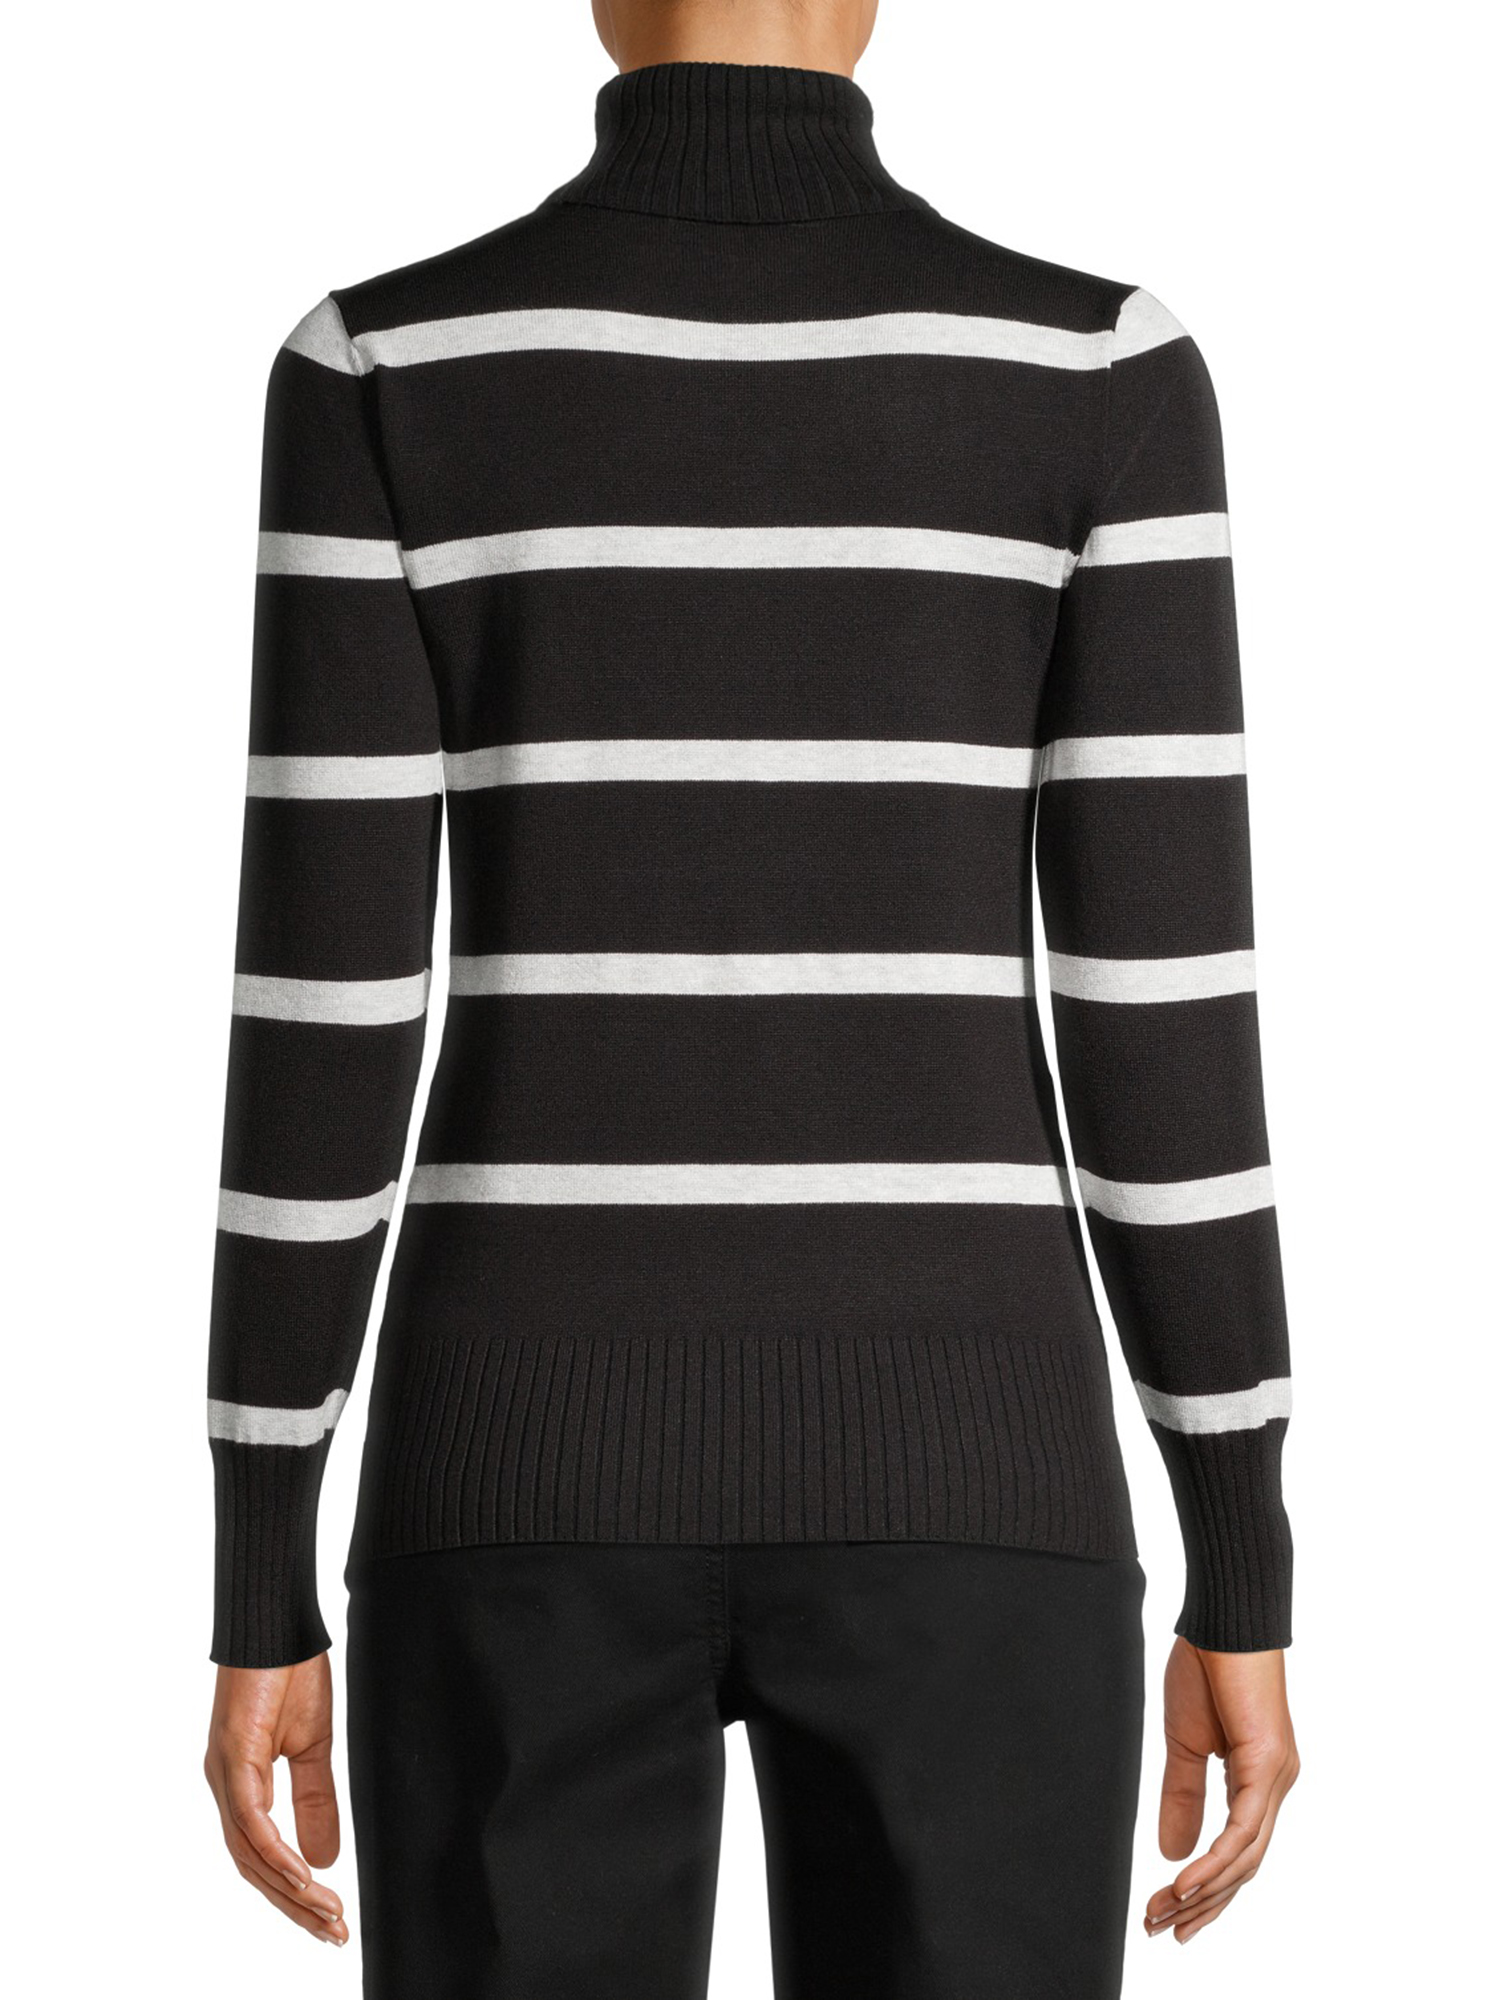 Time and Tru Women's Striped Turtleneck Sweater - image 5 of 6